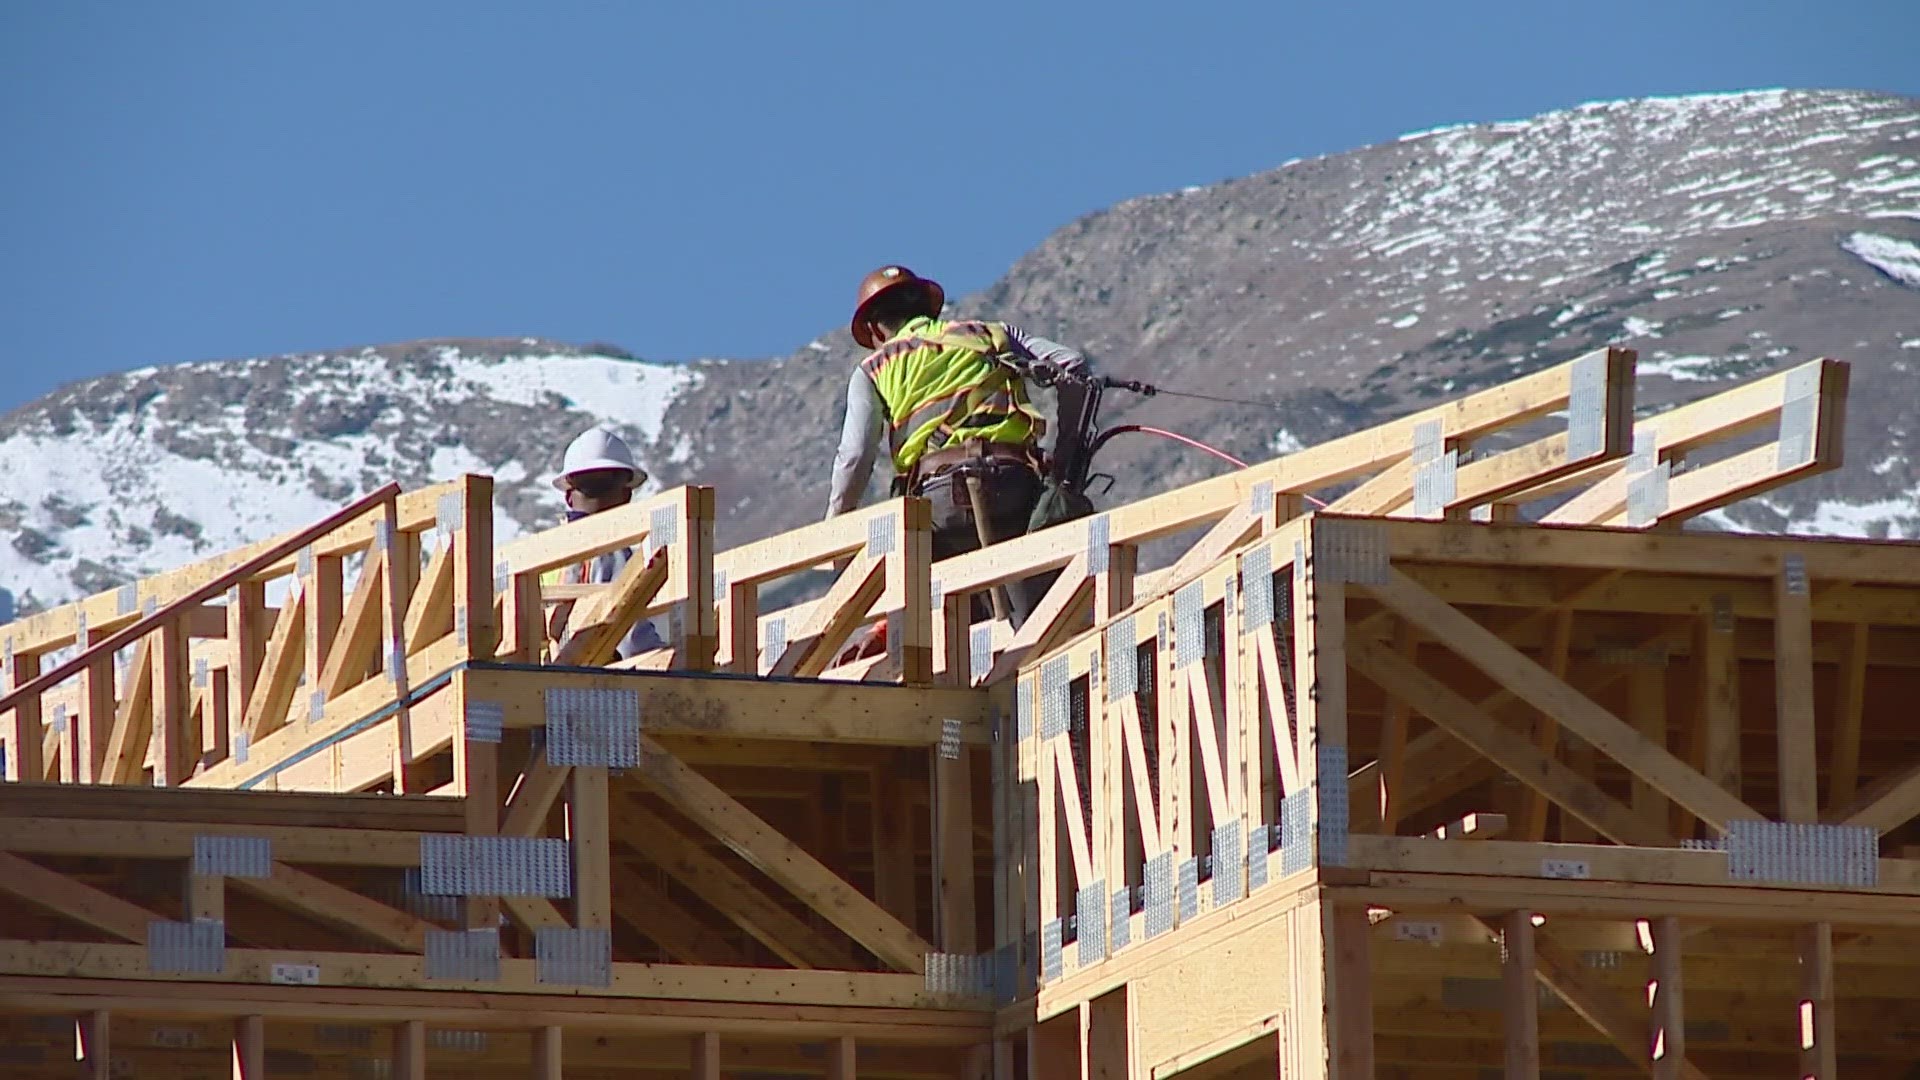 The town of Silverthorne has already built hundreds of affordable homes and townhomes, now they’re building a large affordable housing apartment complex.